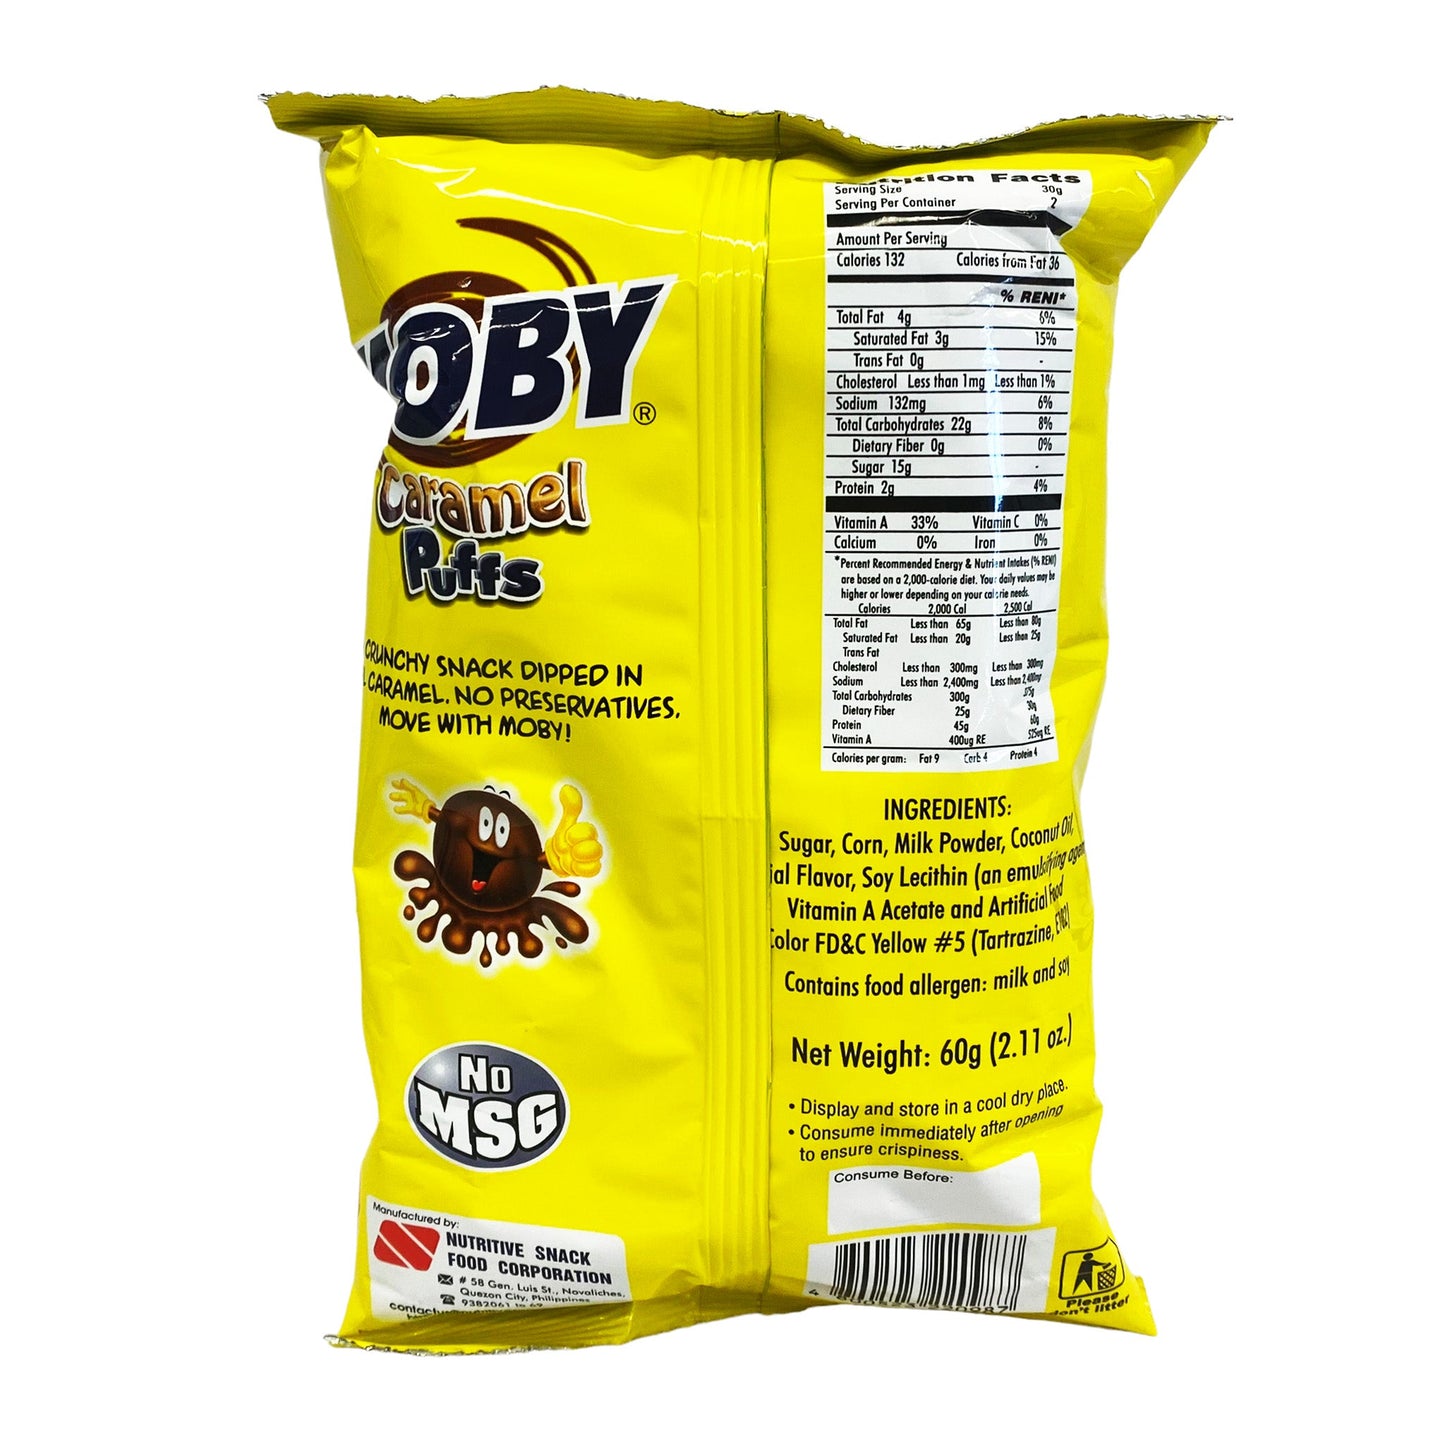 Back graphic view of Nutri Snack Moby Caramel Puffs 2.11oz